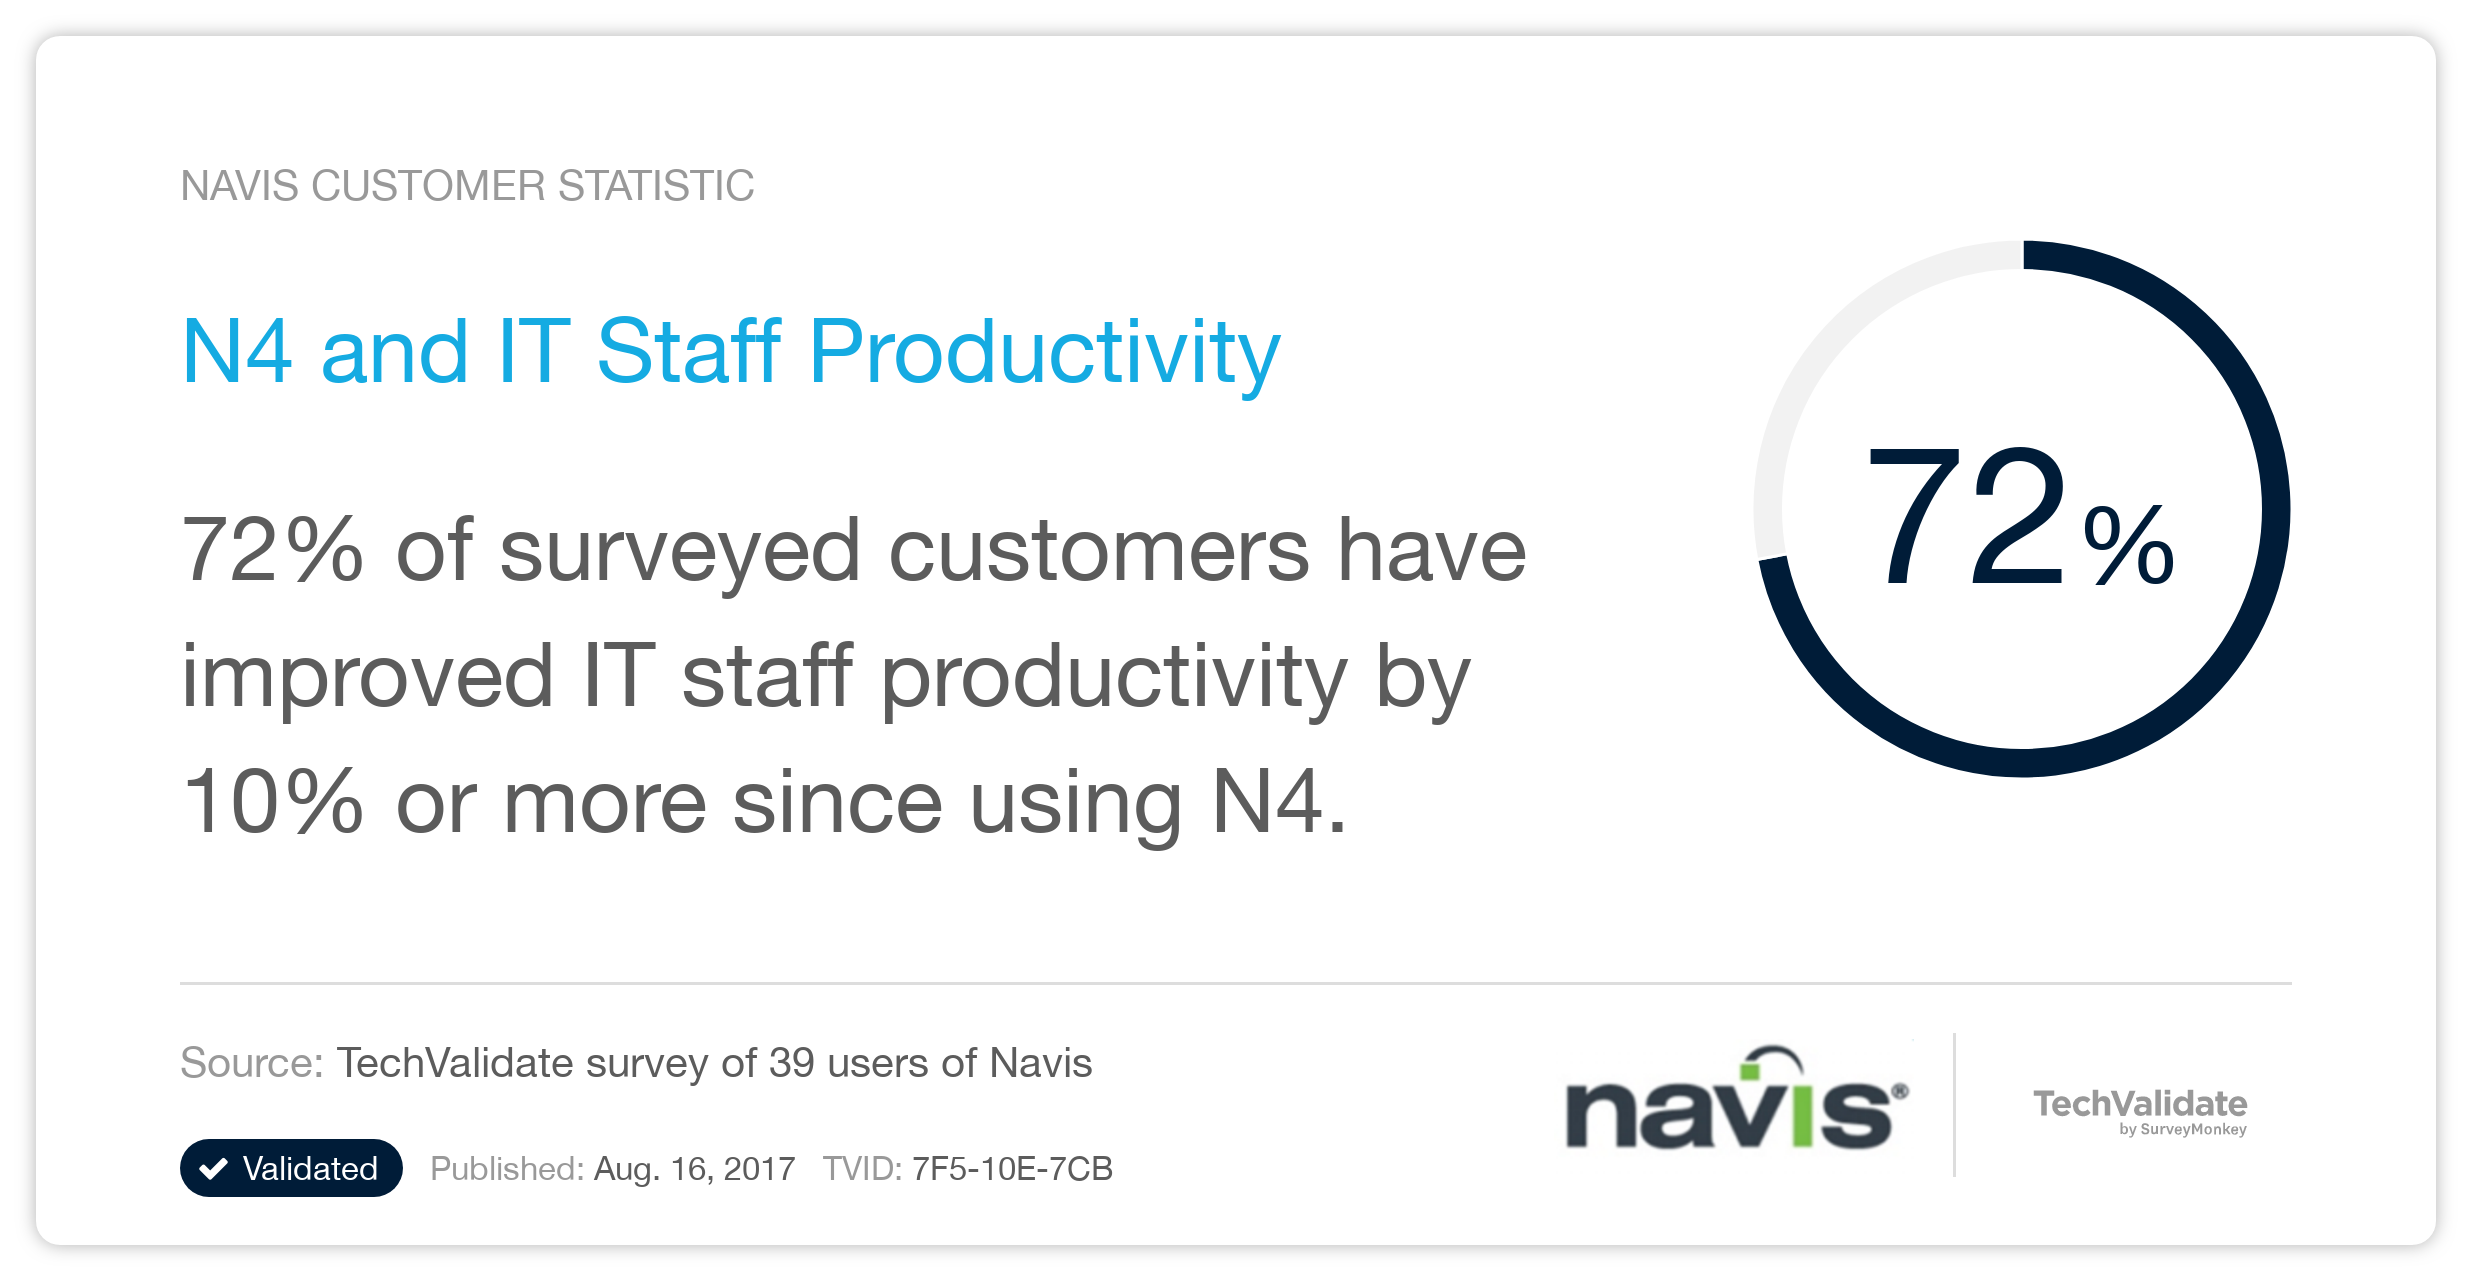 N4 and IT Staff Productivity